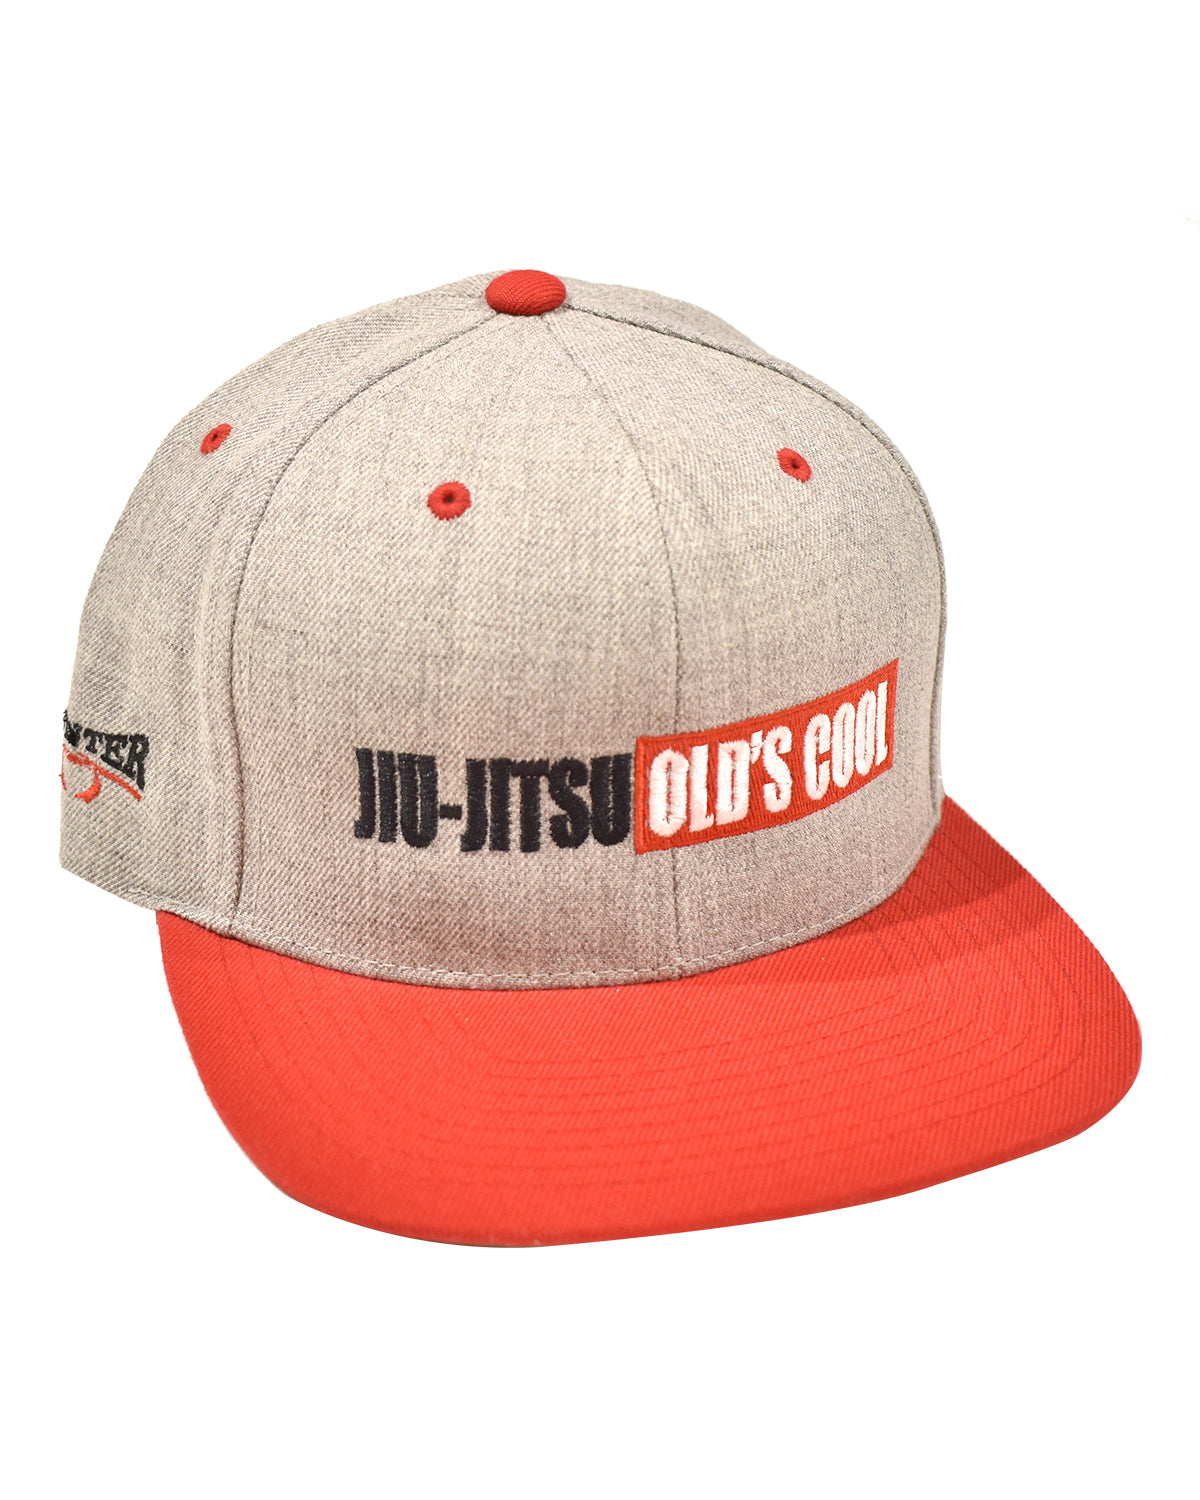 Hat | Old's Cool